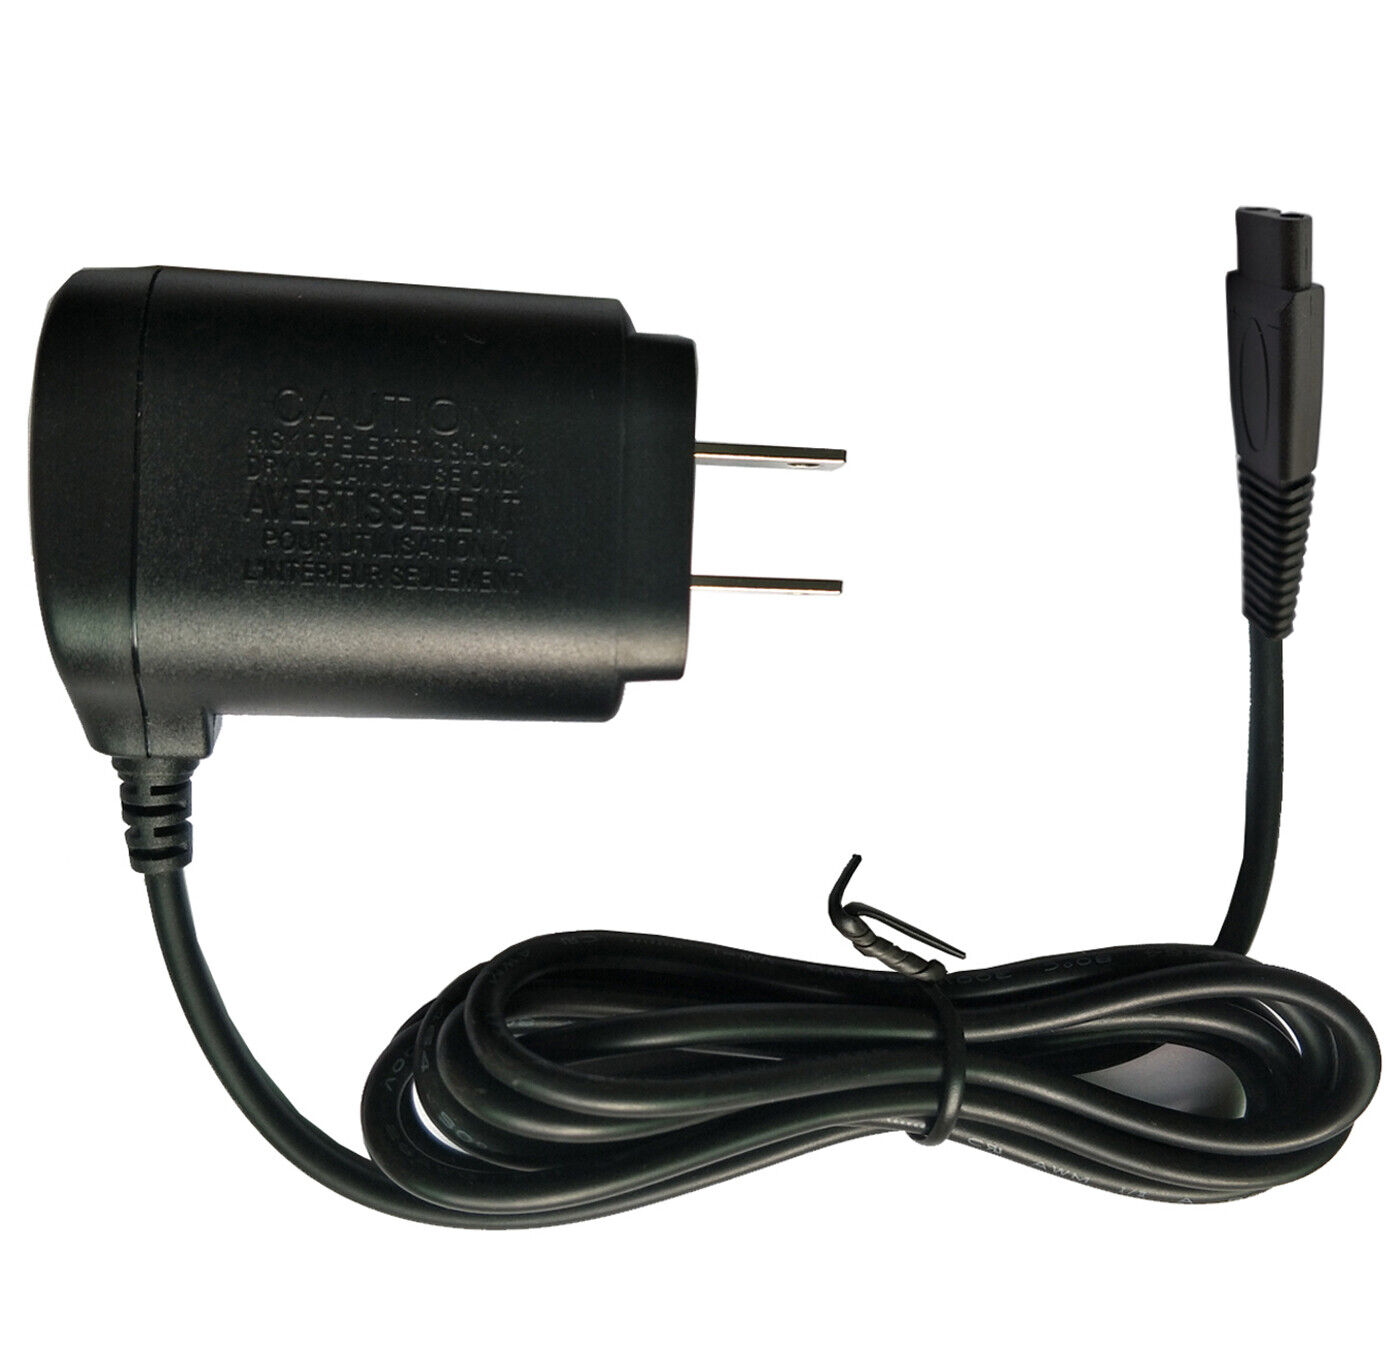 AC Adapter For Andis Profoil Lithium Shaver TS-1 Model 17165 17150 Power Charger Type AC/DC Adapter MPN 17165 CL-17165